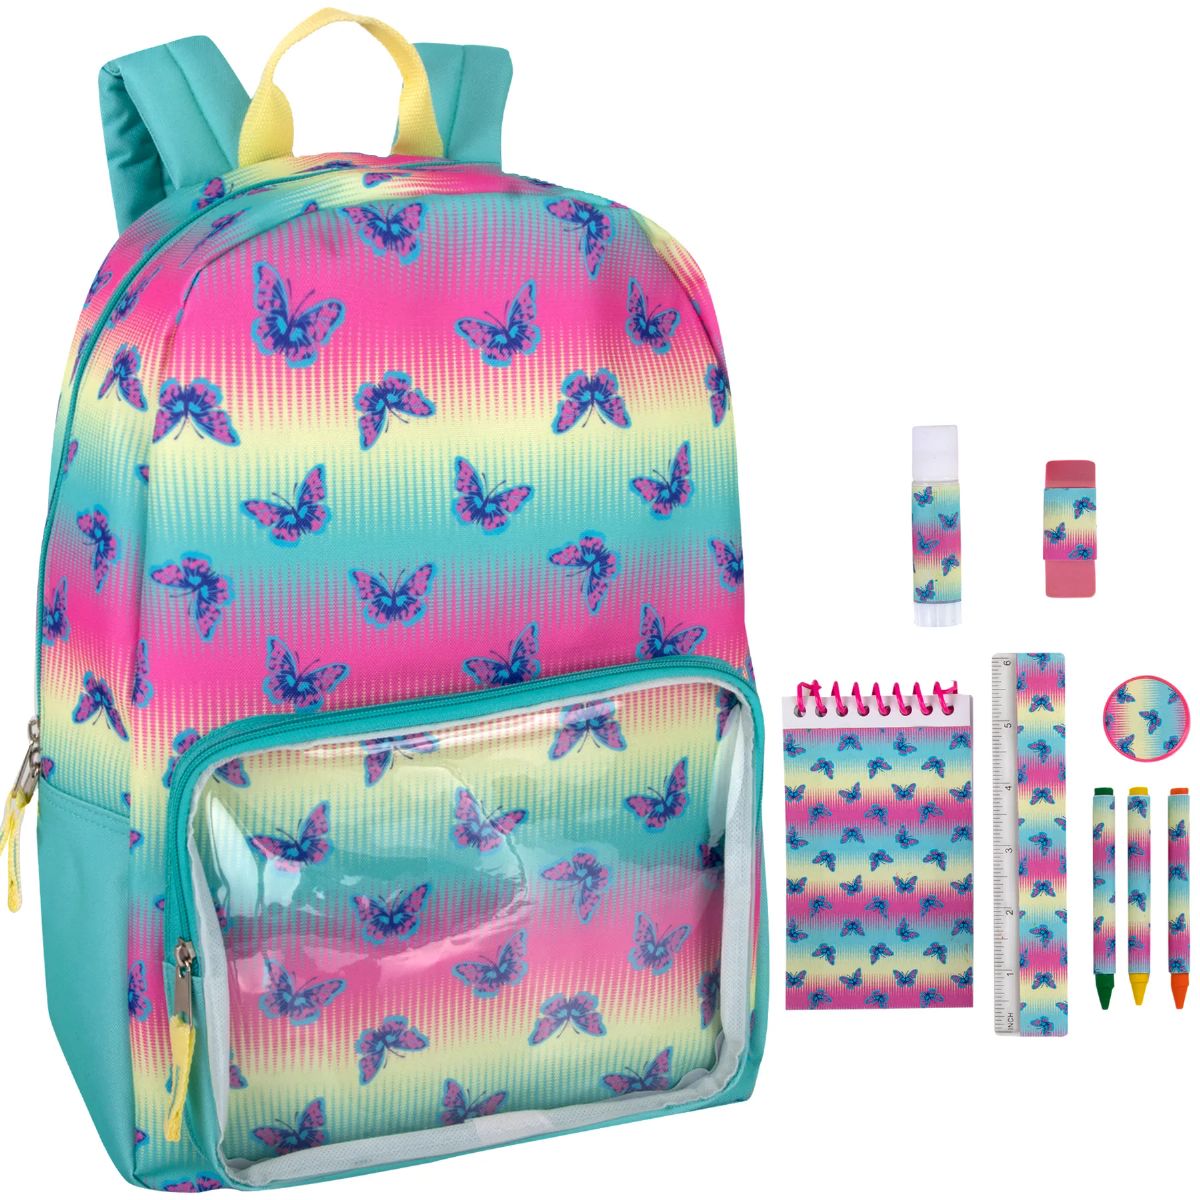 24 Wholesale Preassembled 17 Inch Butterfly Backpack And 9 Piece School Supply Kit